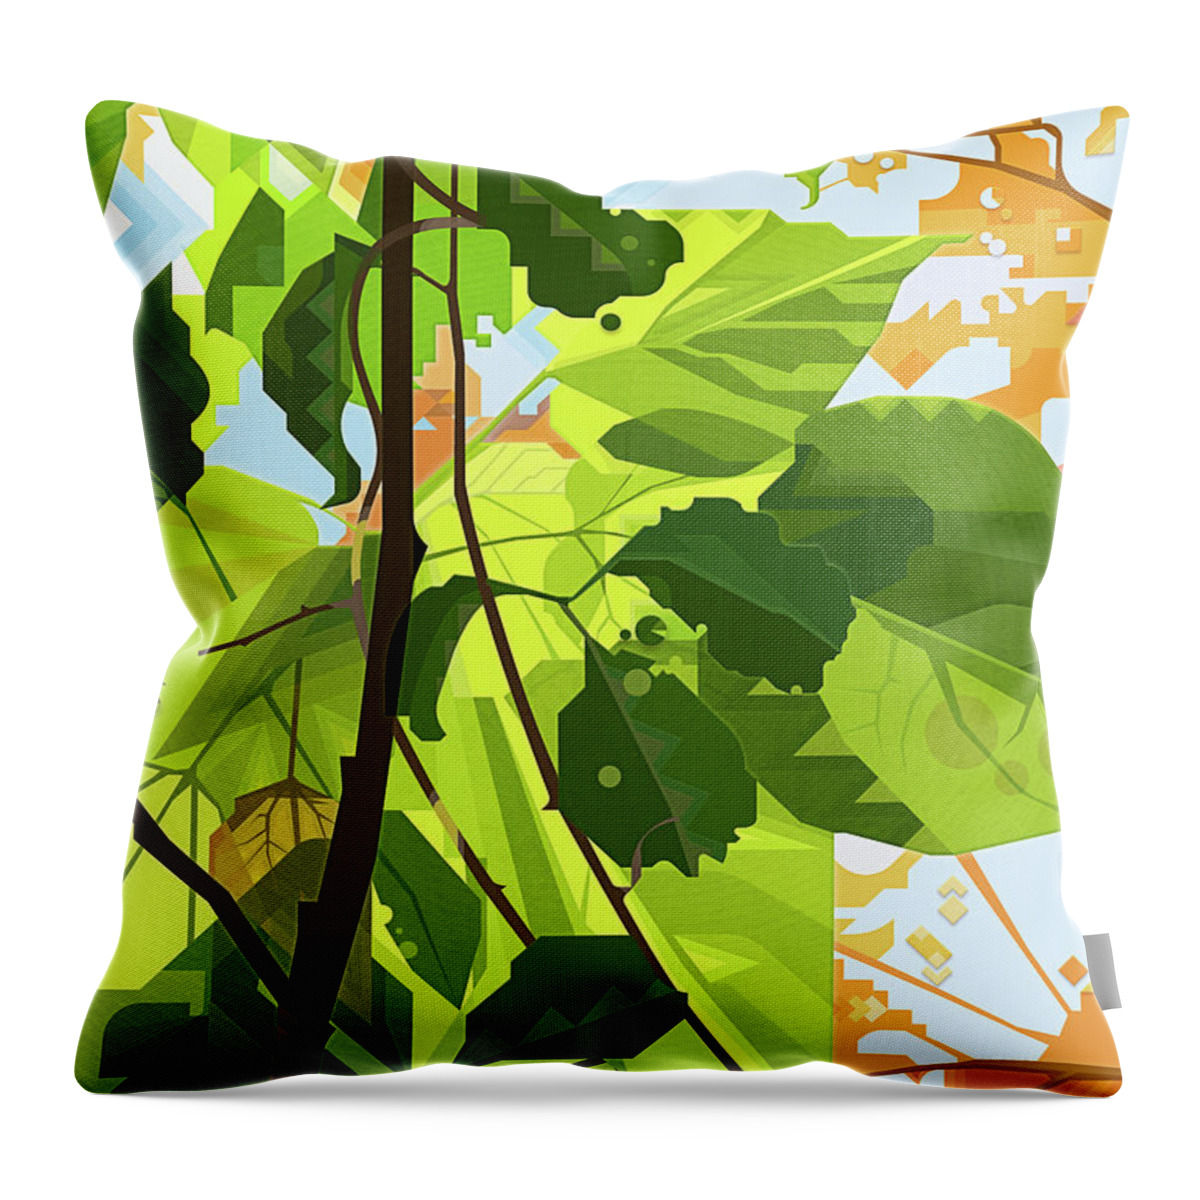 Redbud Tree Throw Pillow featuring the digital art Intertwined by Garth Glazier